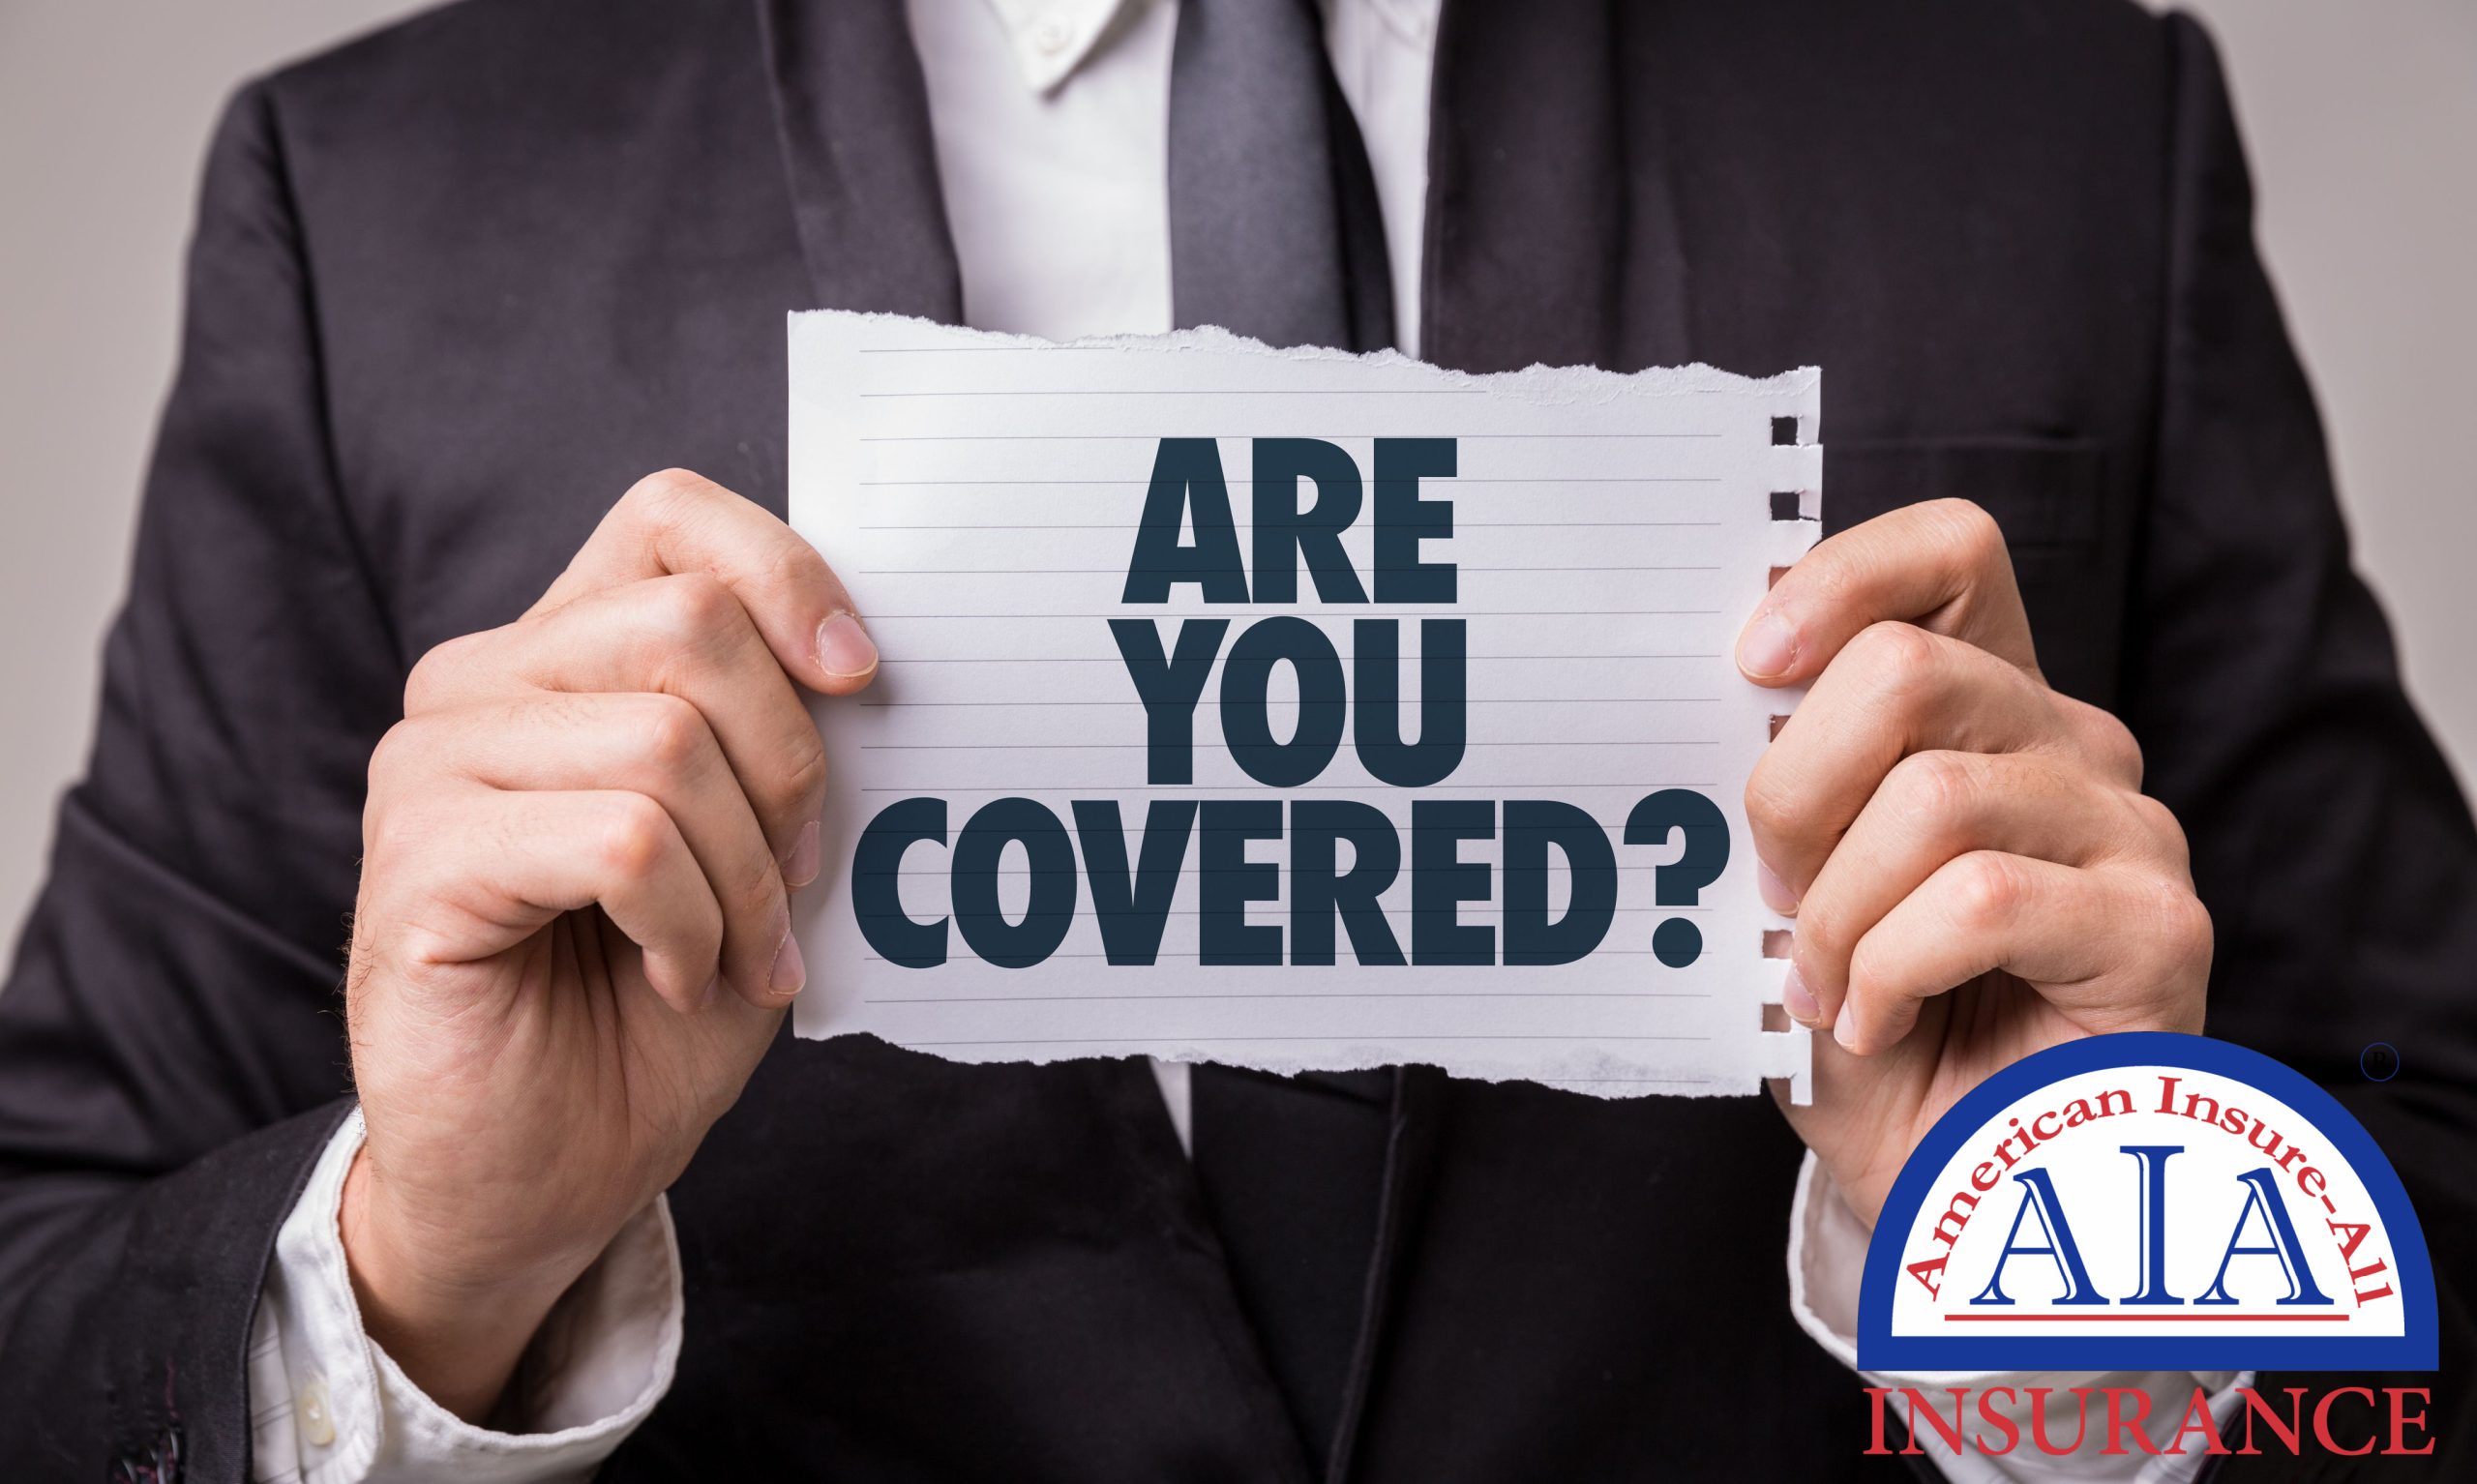 American Insure-All®: Your Go-To Place for Business Liability Insurance in Renton!